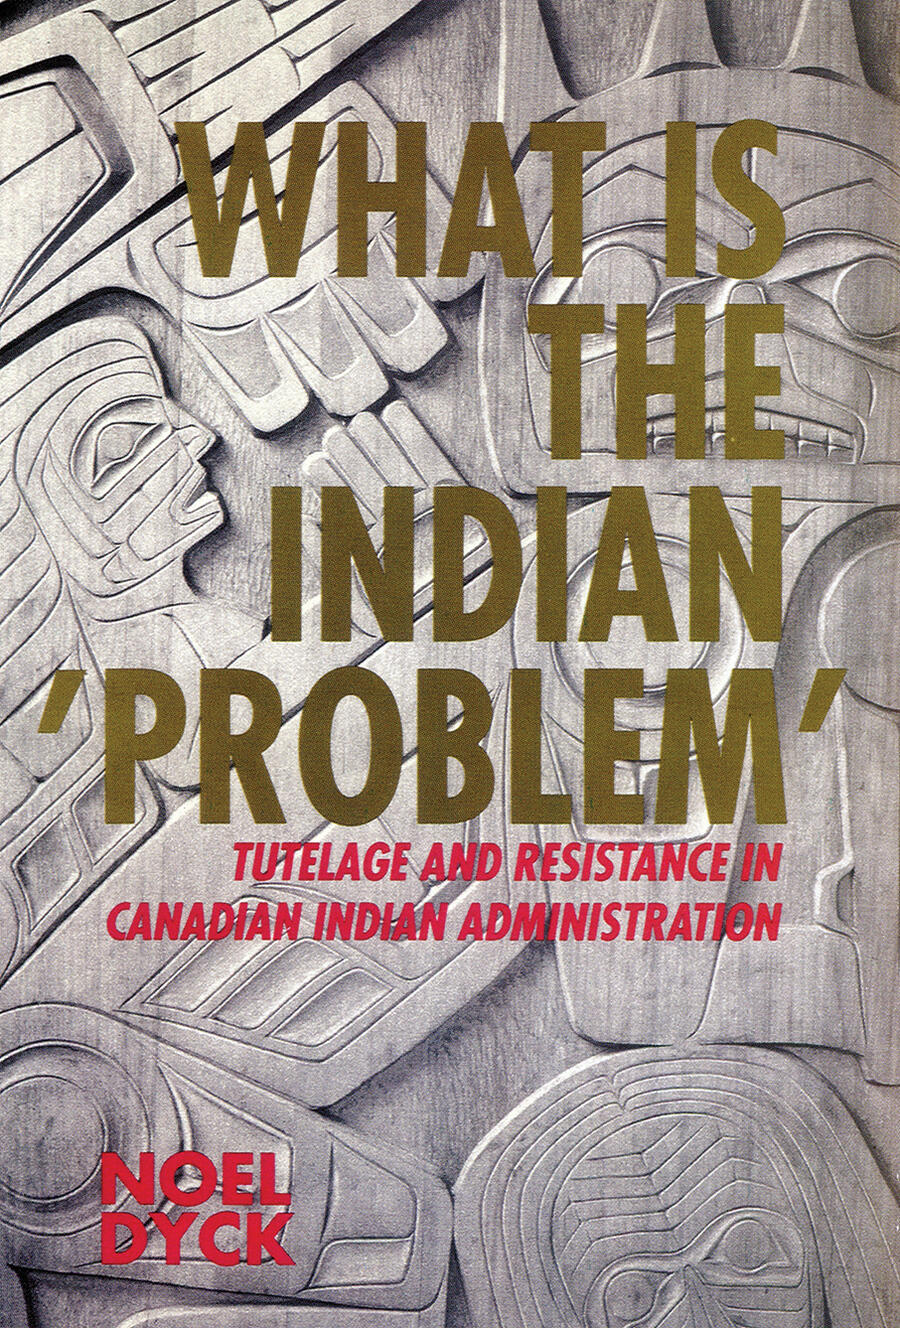 the indian problem essay